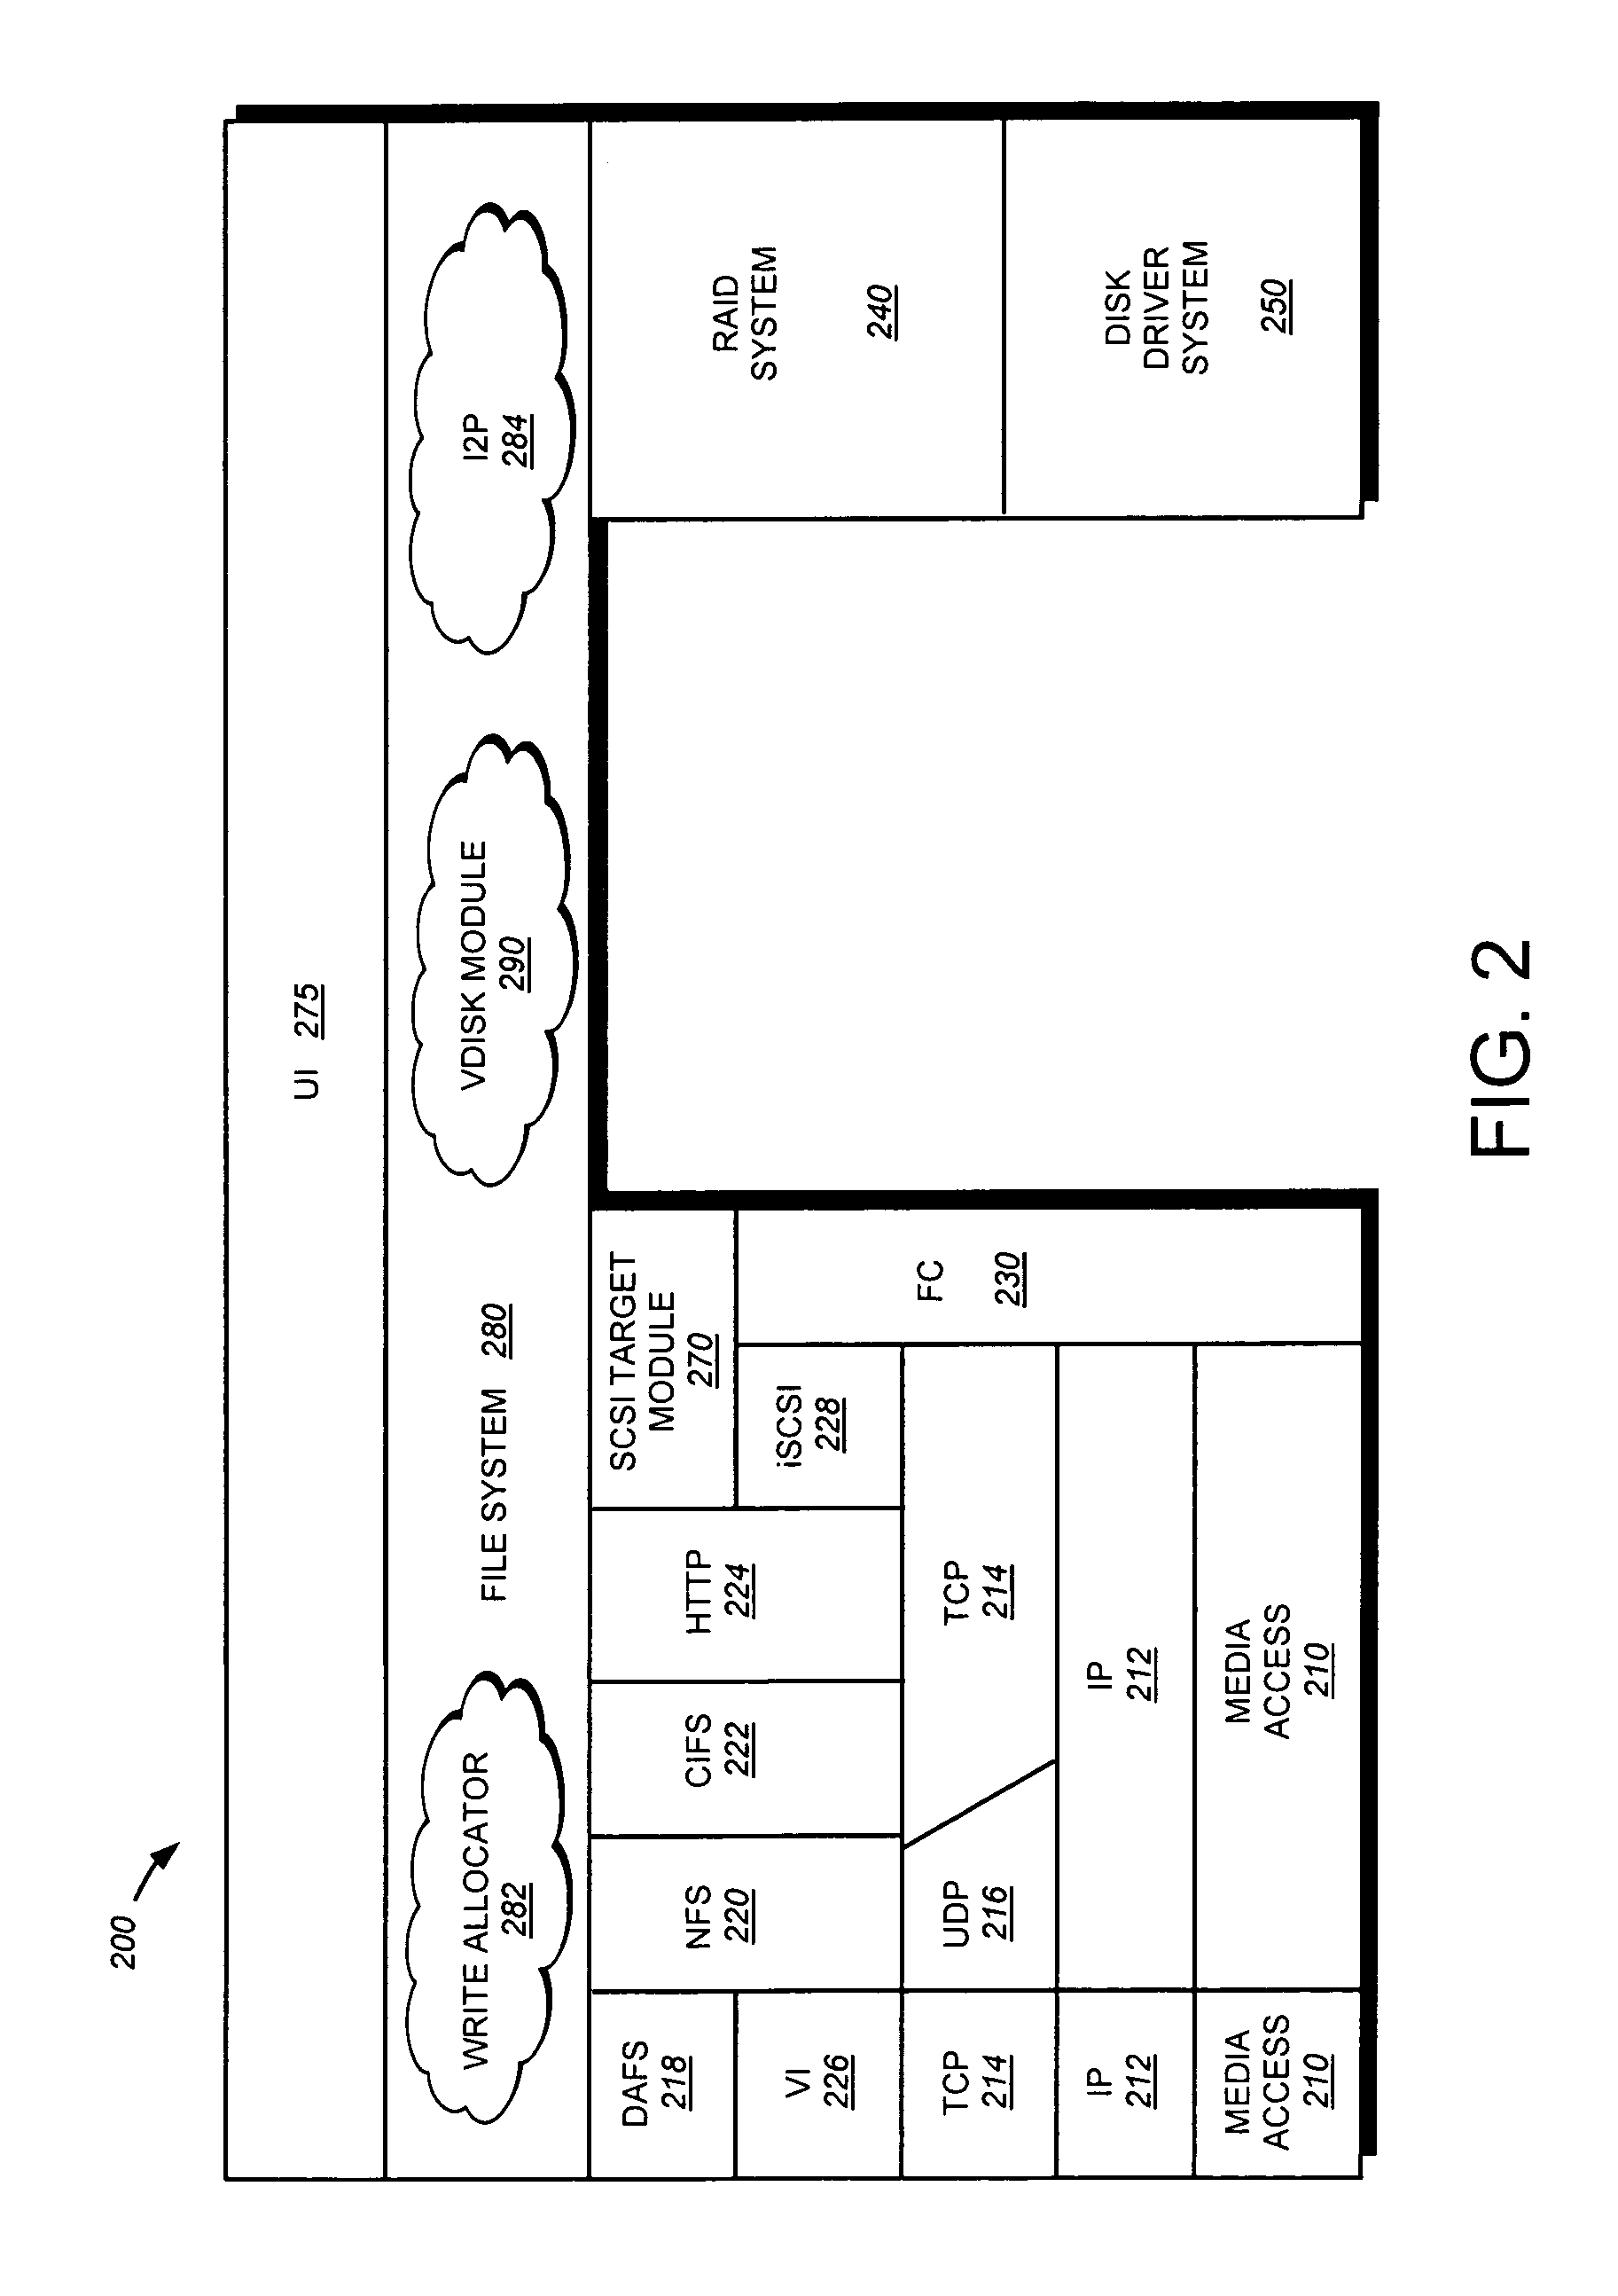 System and method for maintaining mappings from data containers to their parent directories